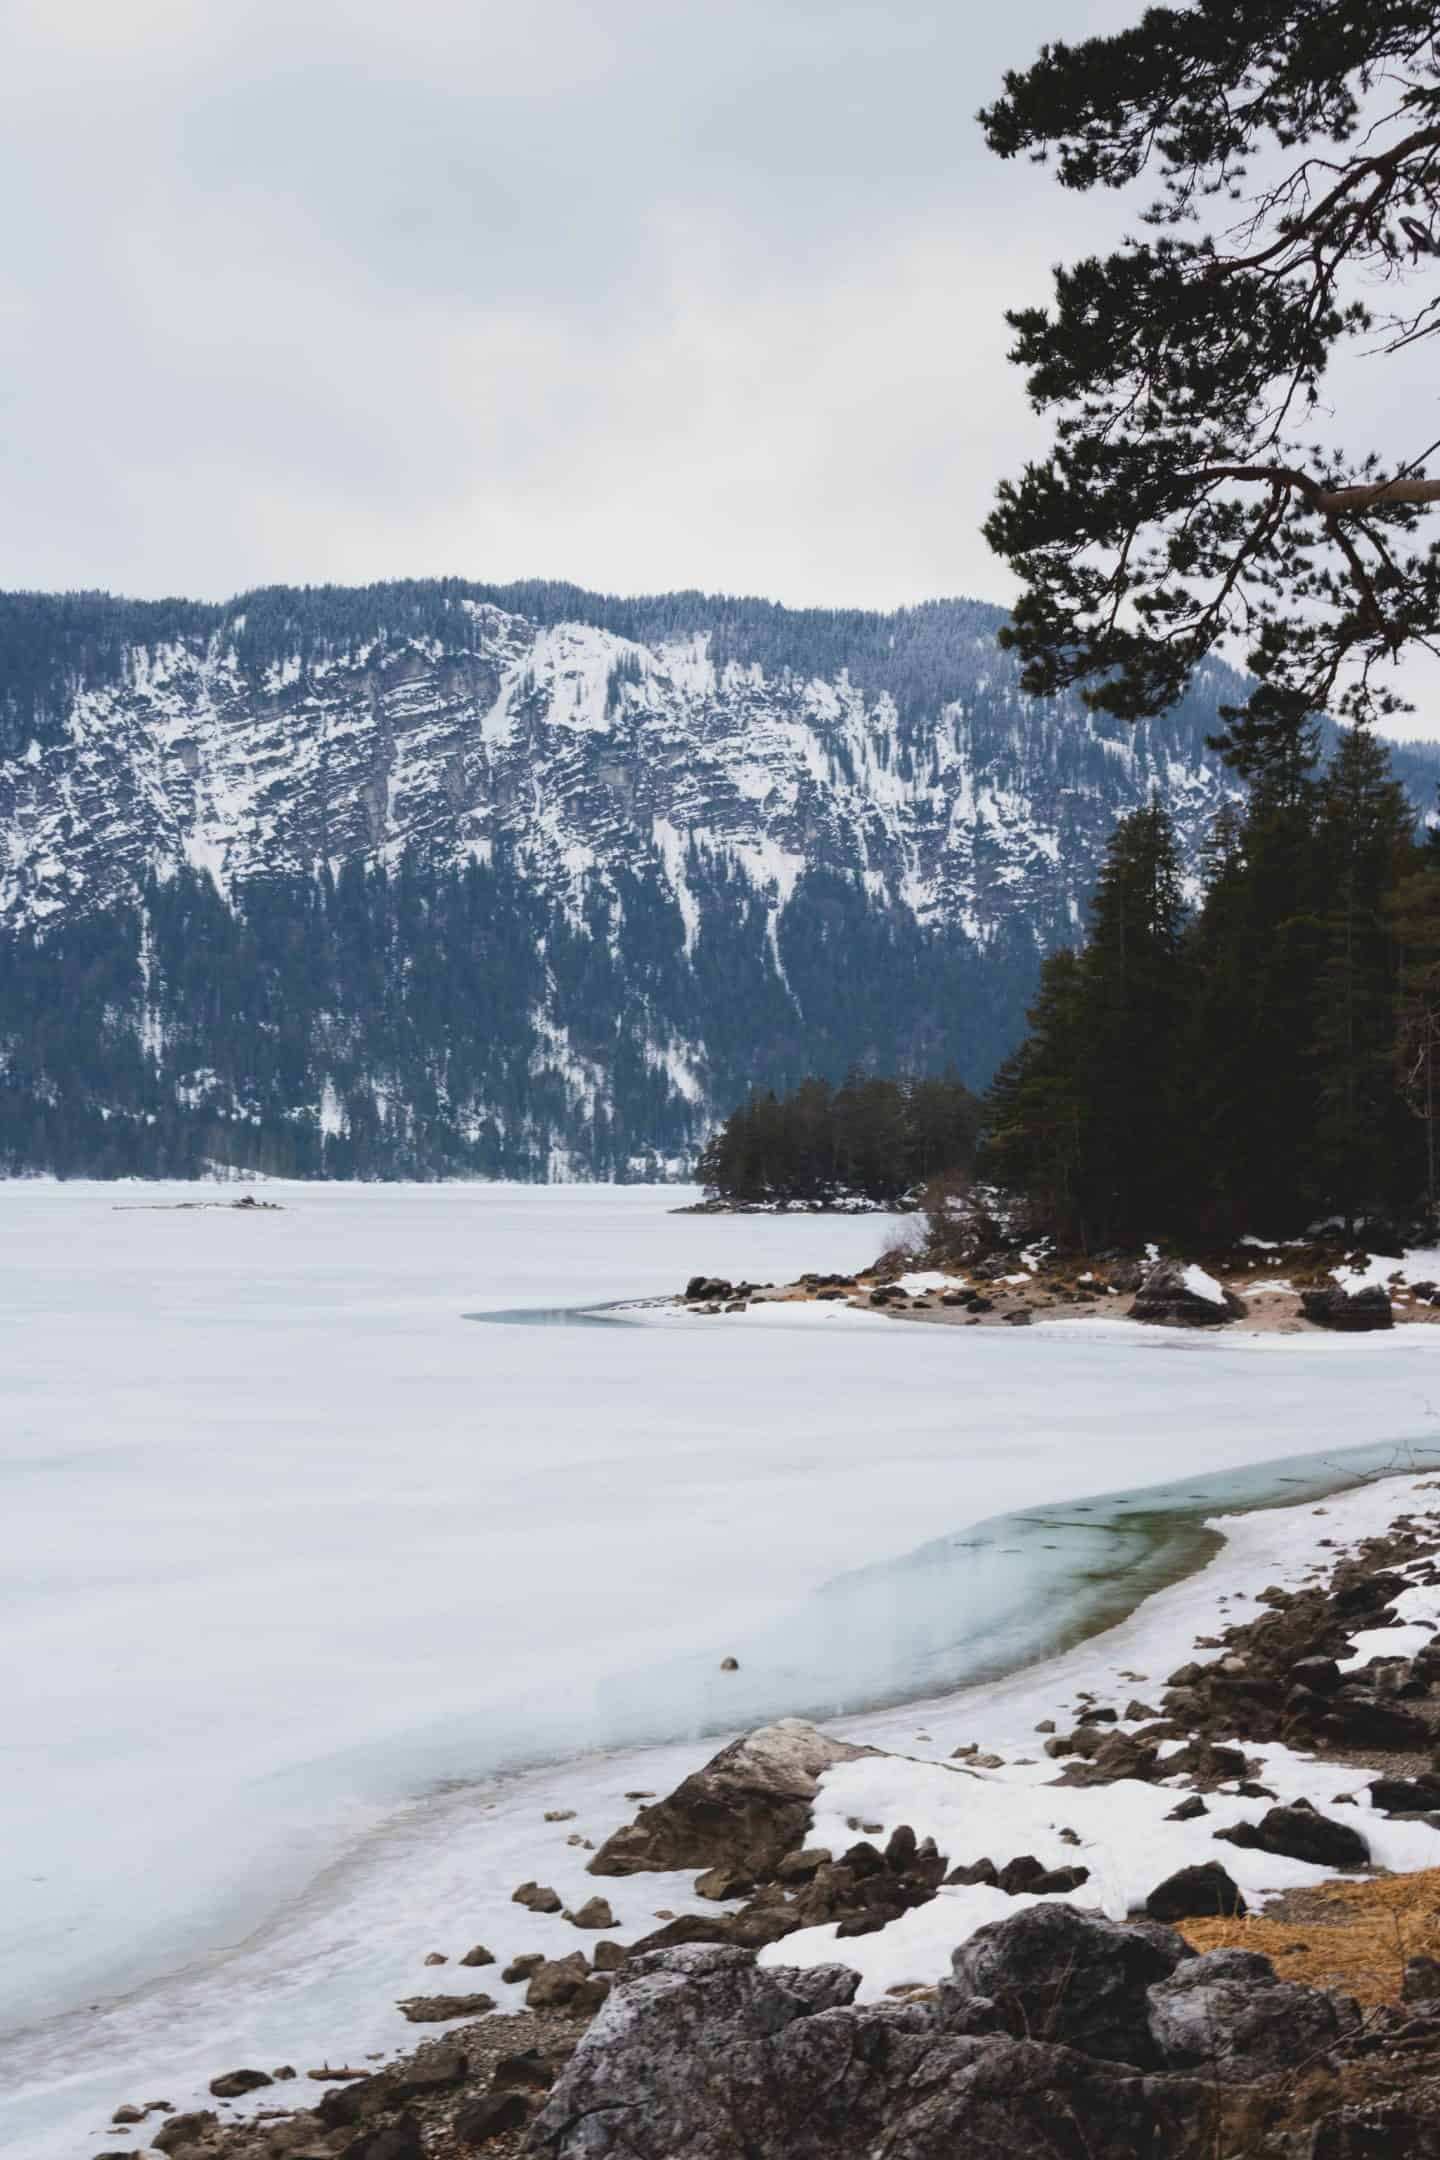 Frozen lake, a snowy mountain and pine trees